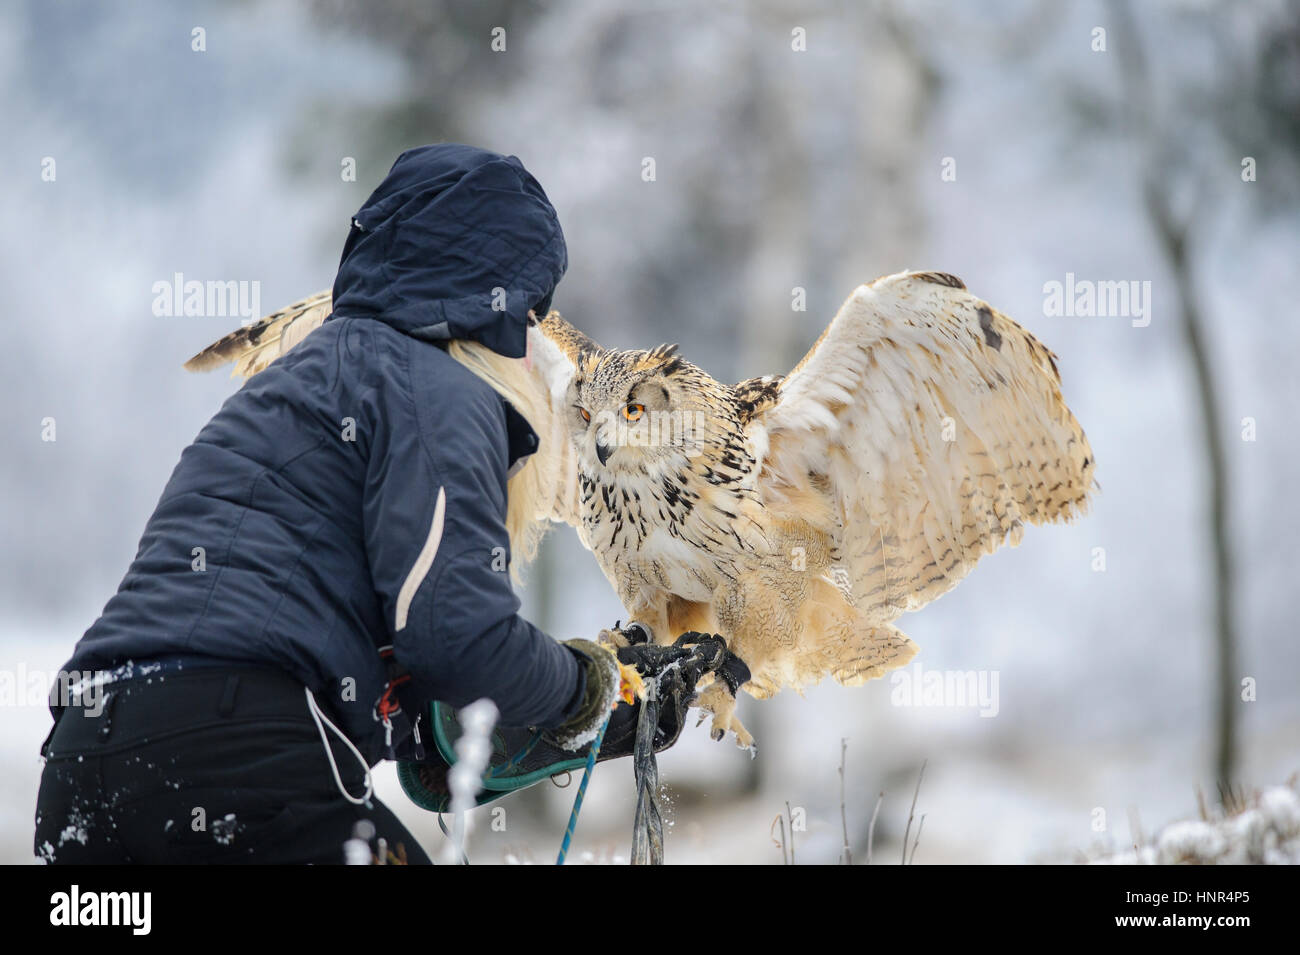 Falconer wit landing Eurasian Eagle Owl to her hand with gauntlet in winter time. Blonde hawker woman in blue jacket with her raptor Stock Photo